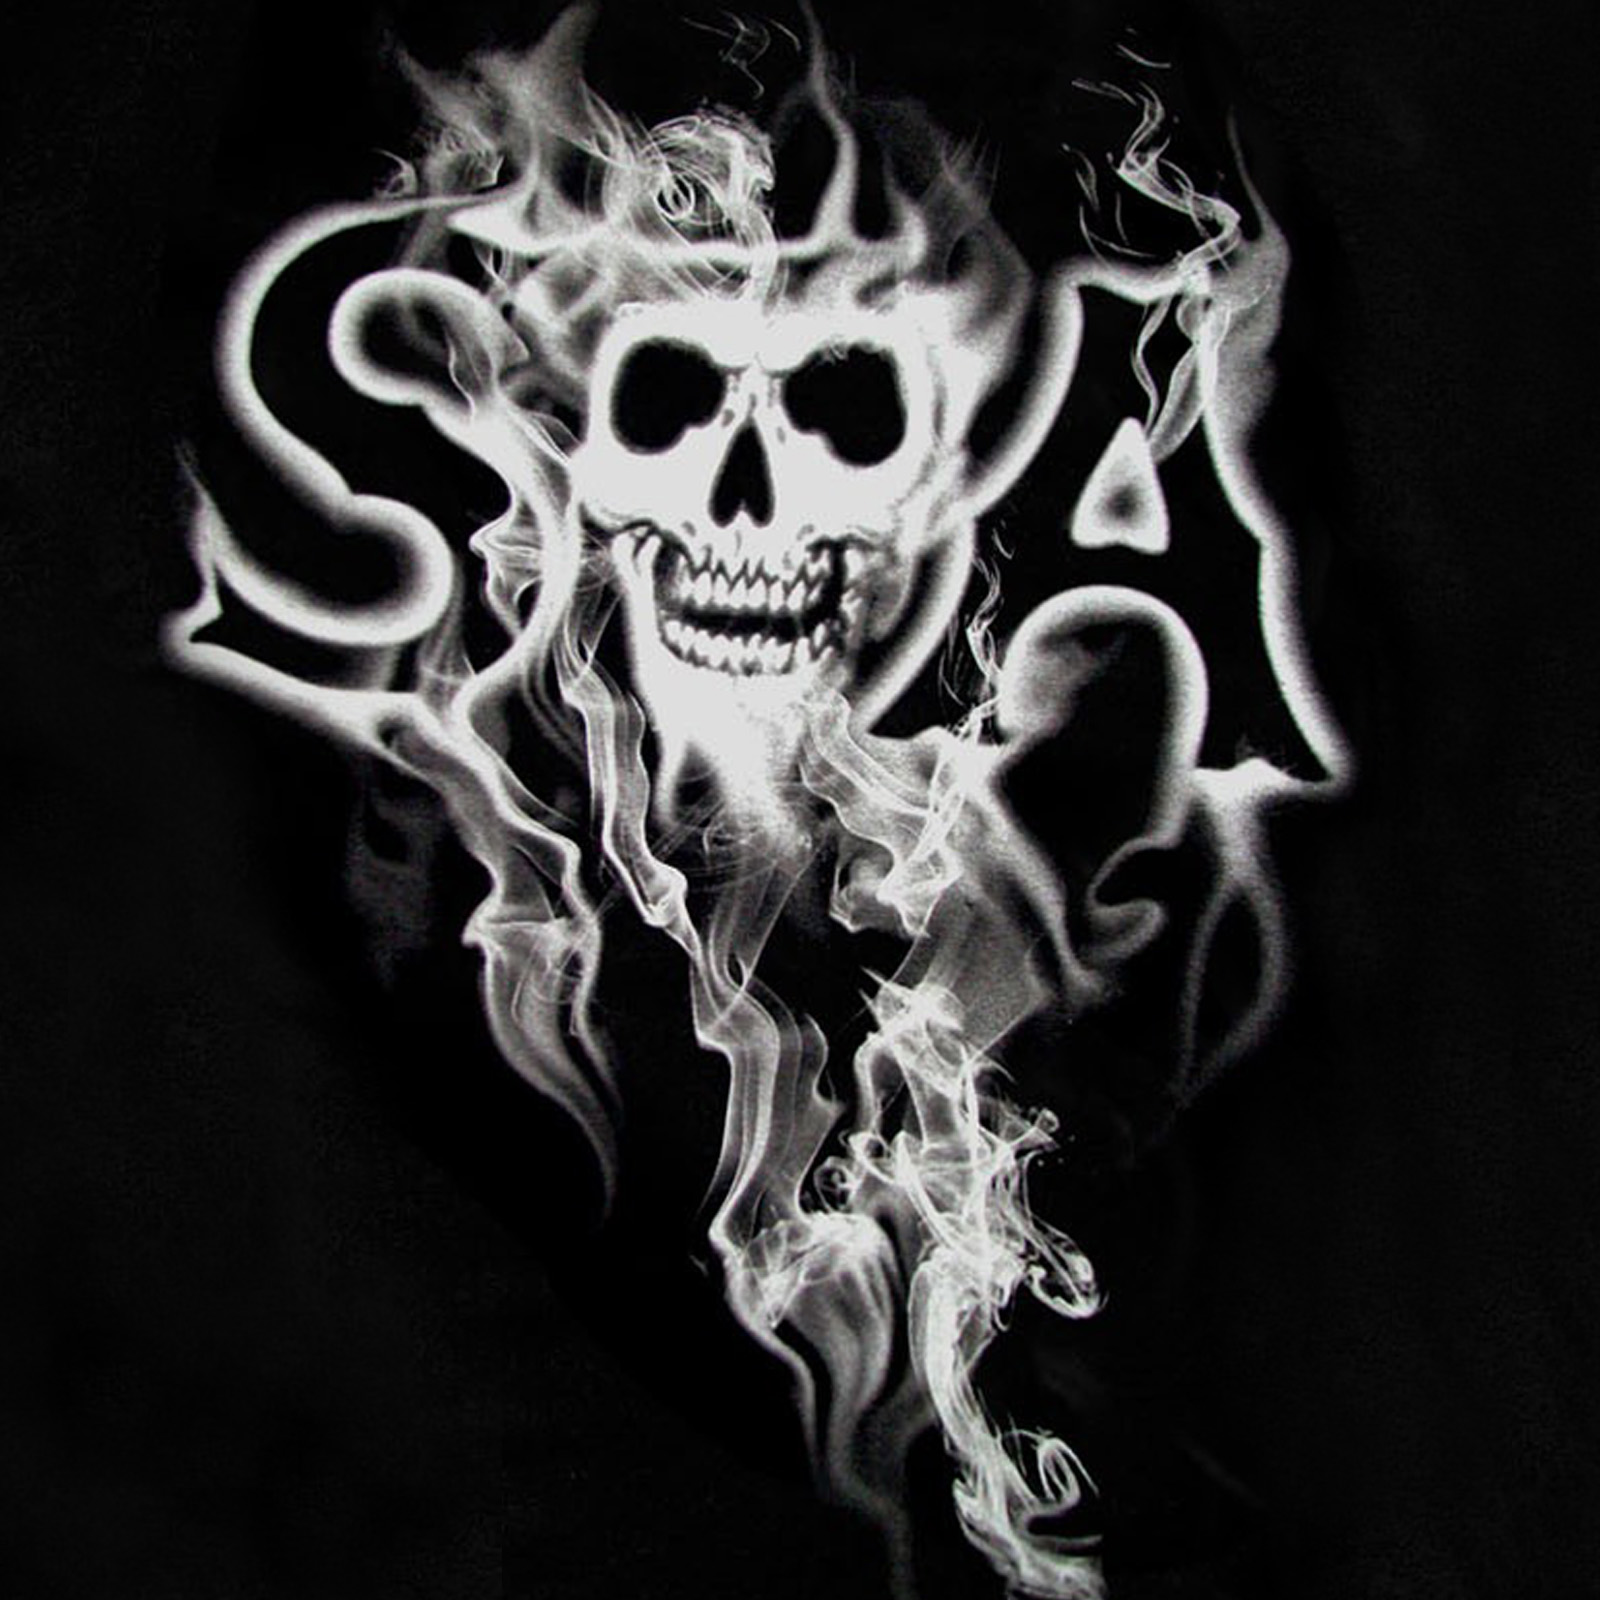 Sons of Anarchy - T-shirt Smokey Reaper